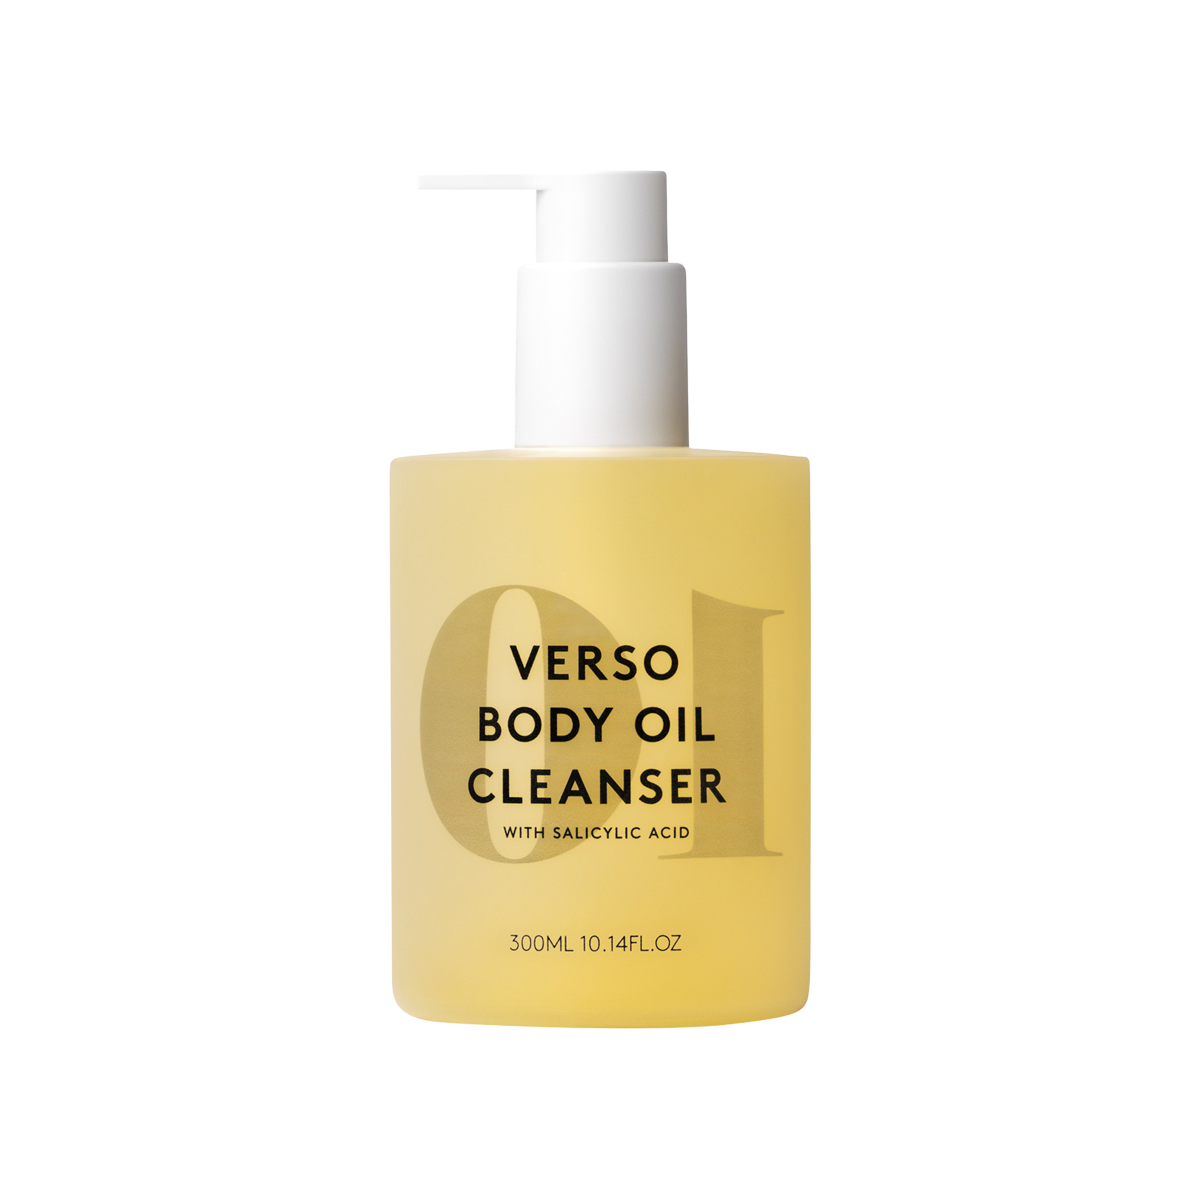 Verso - Body Oil Cleanser with Salicylic Acid